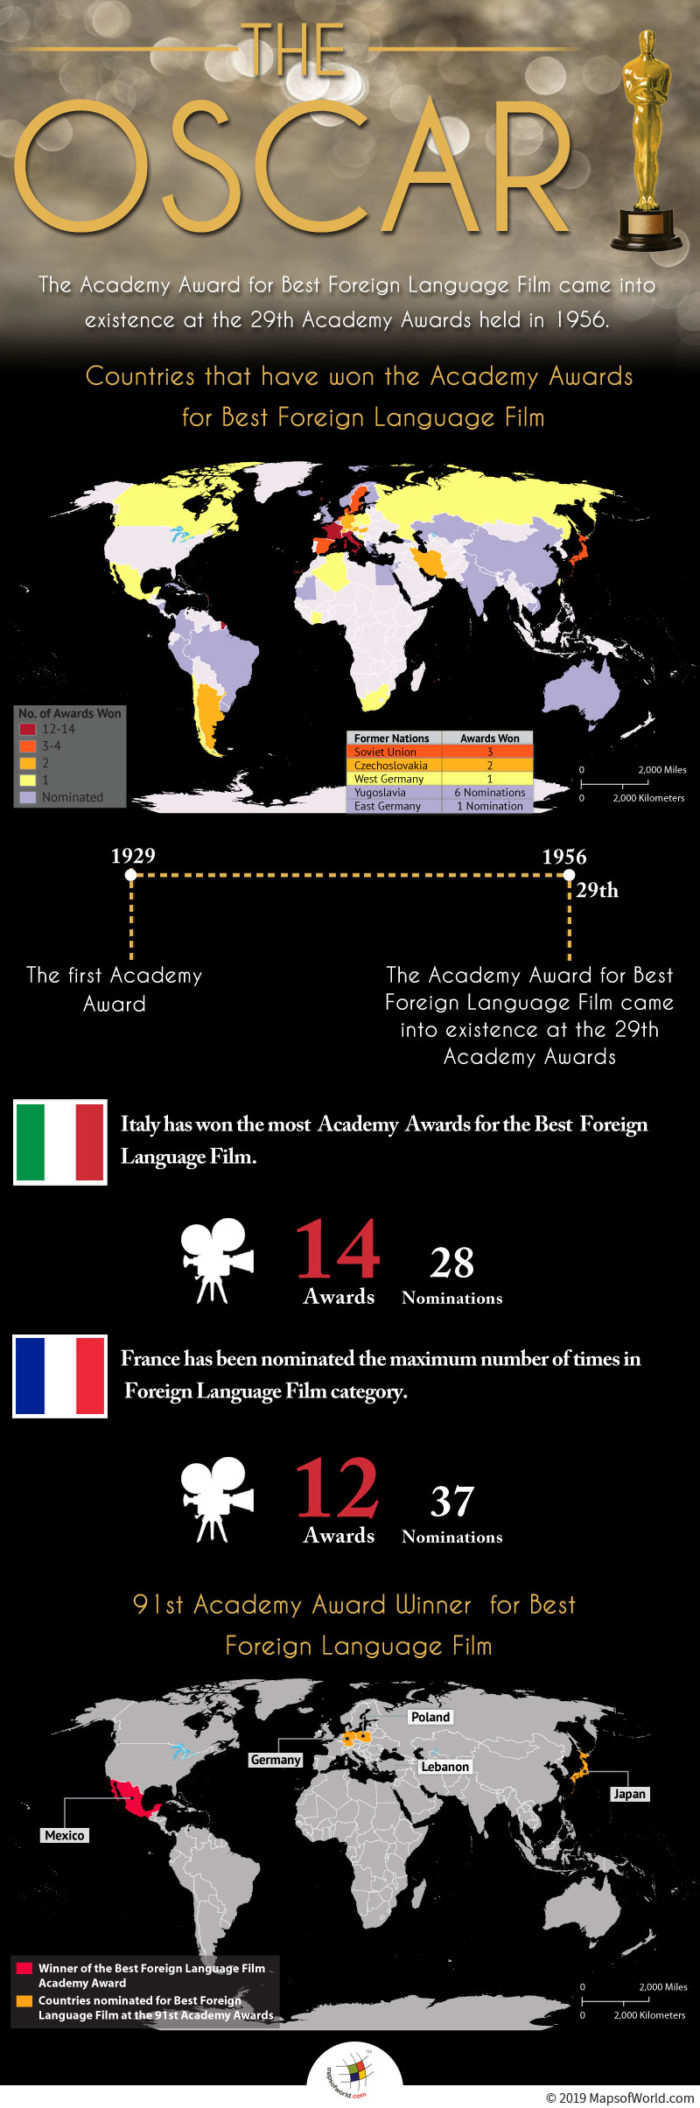 Infographic Showing Details of Academy Award Winning Countries for Best Foreign Language Film